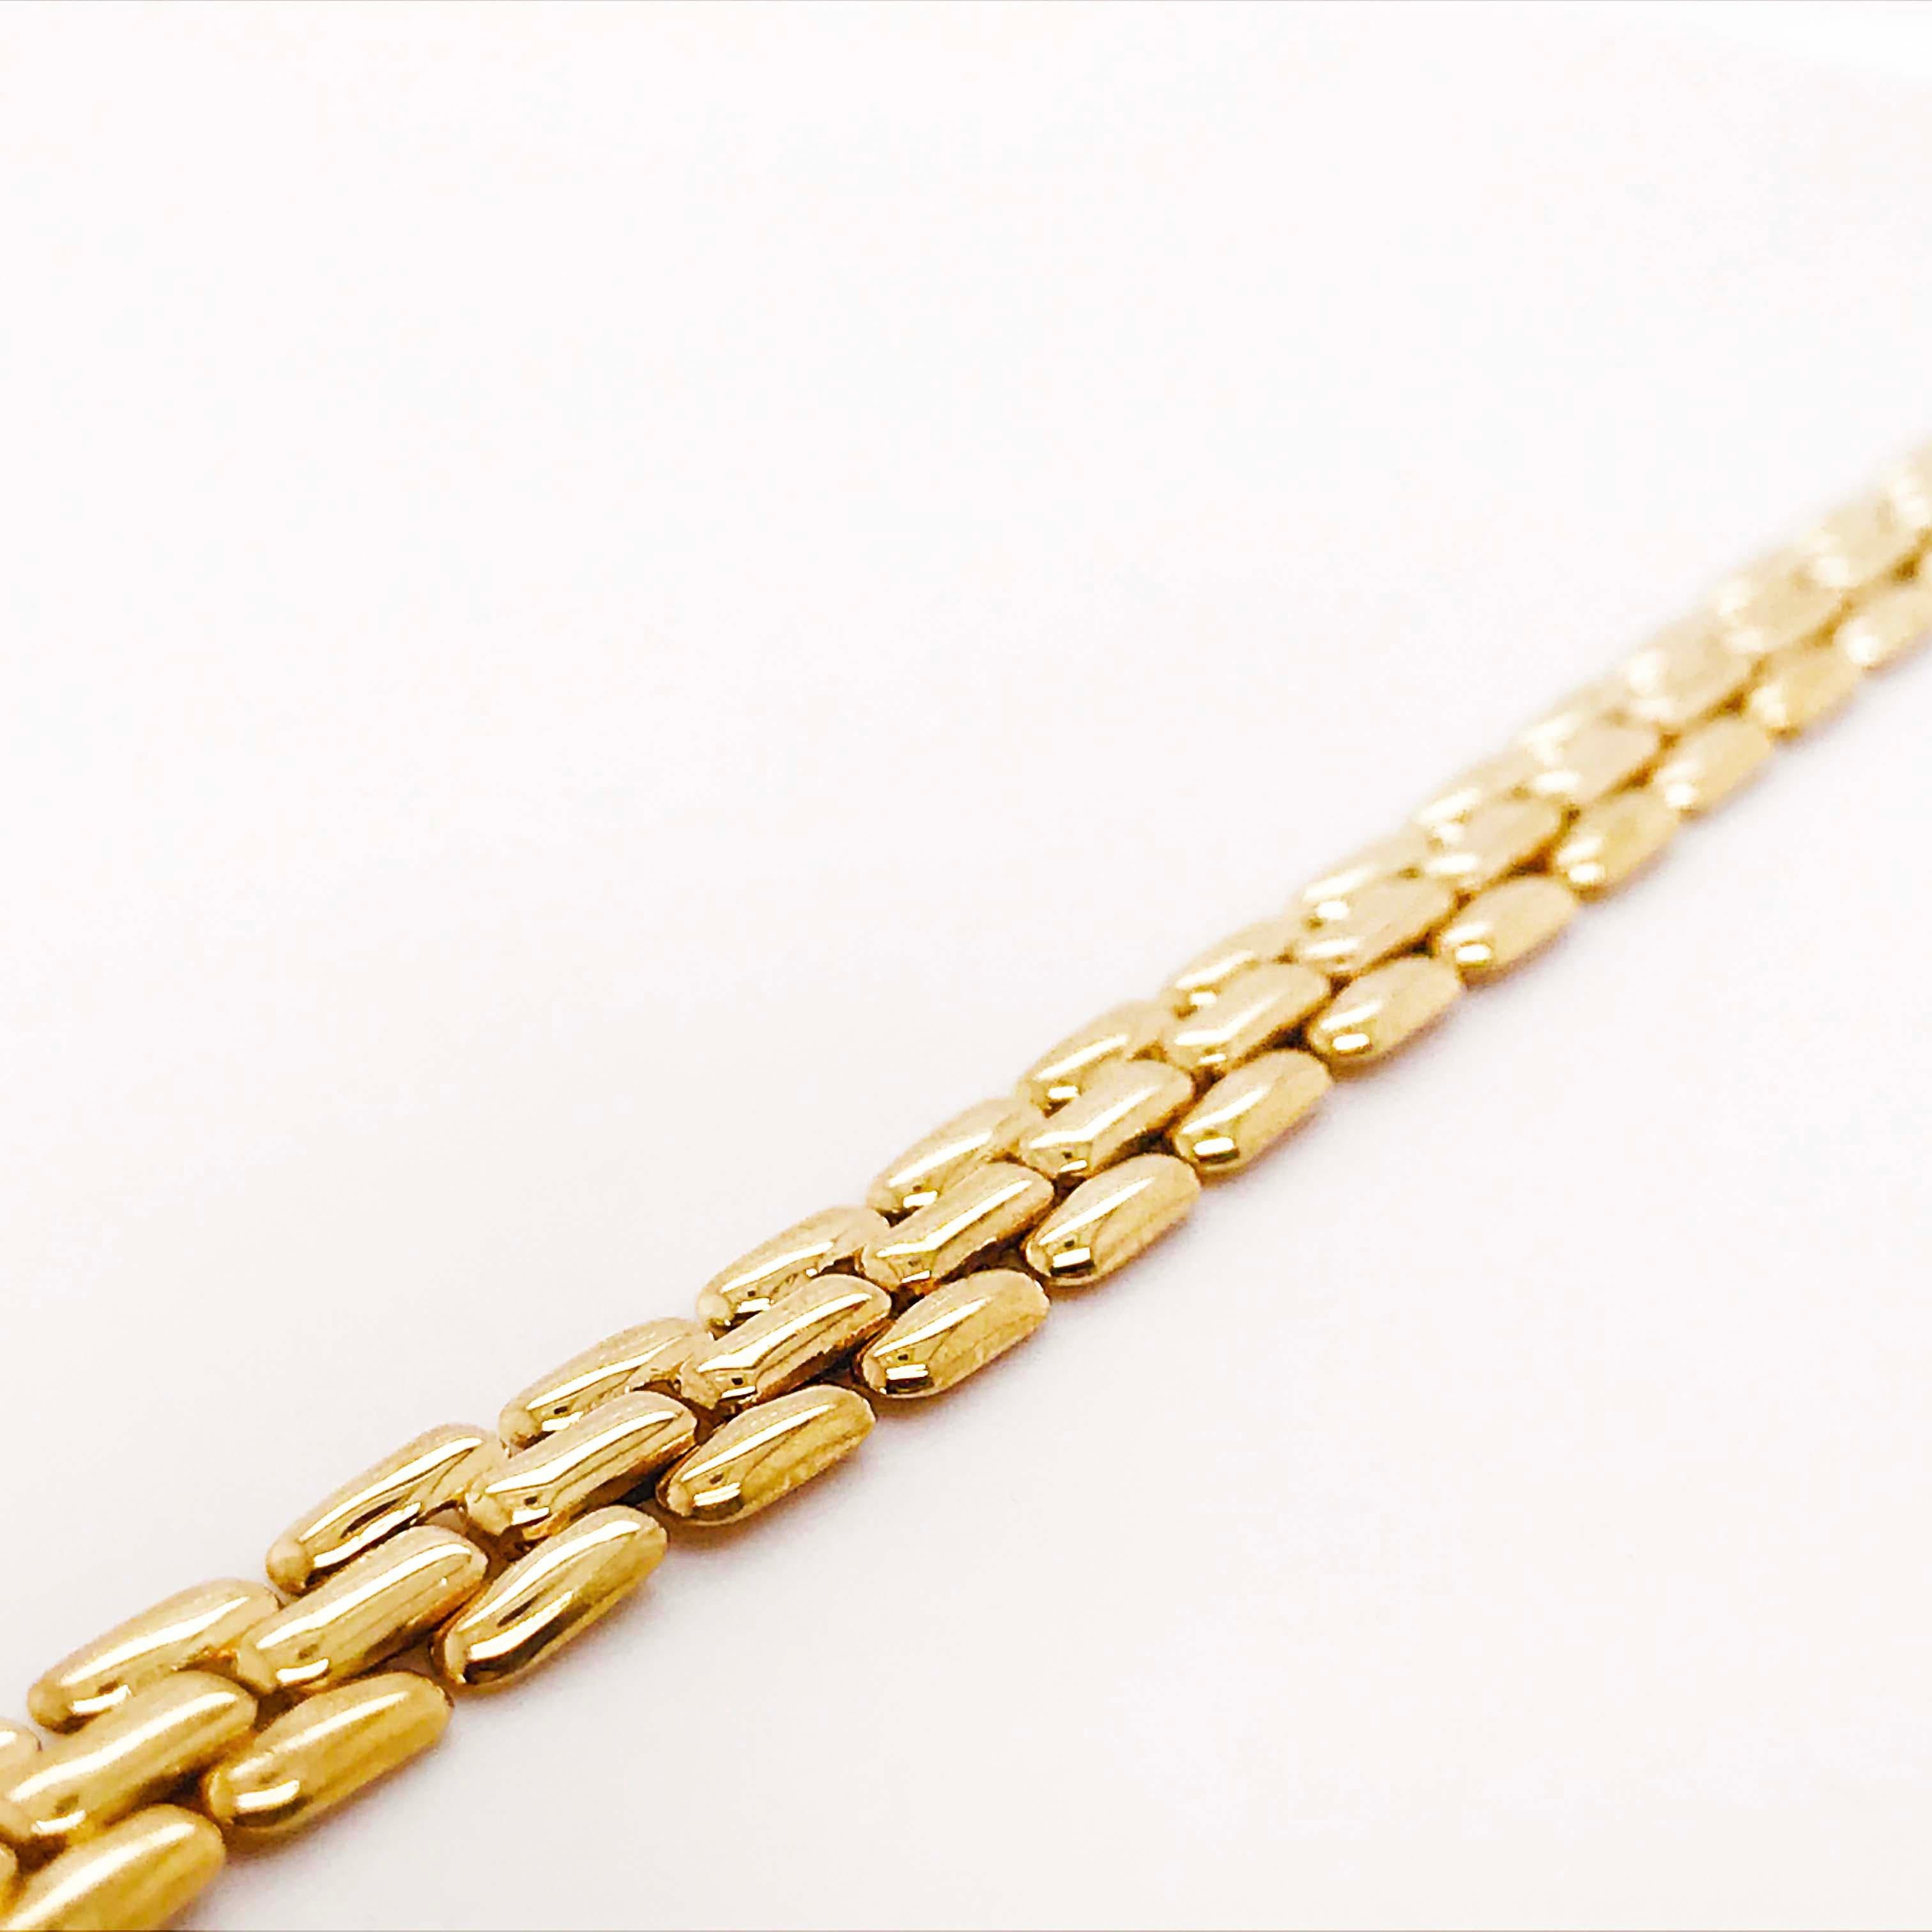 Gold Panther Chain Bracelet with Large Lobster Clasp, 14 Karat Yellow Gold 10